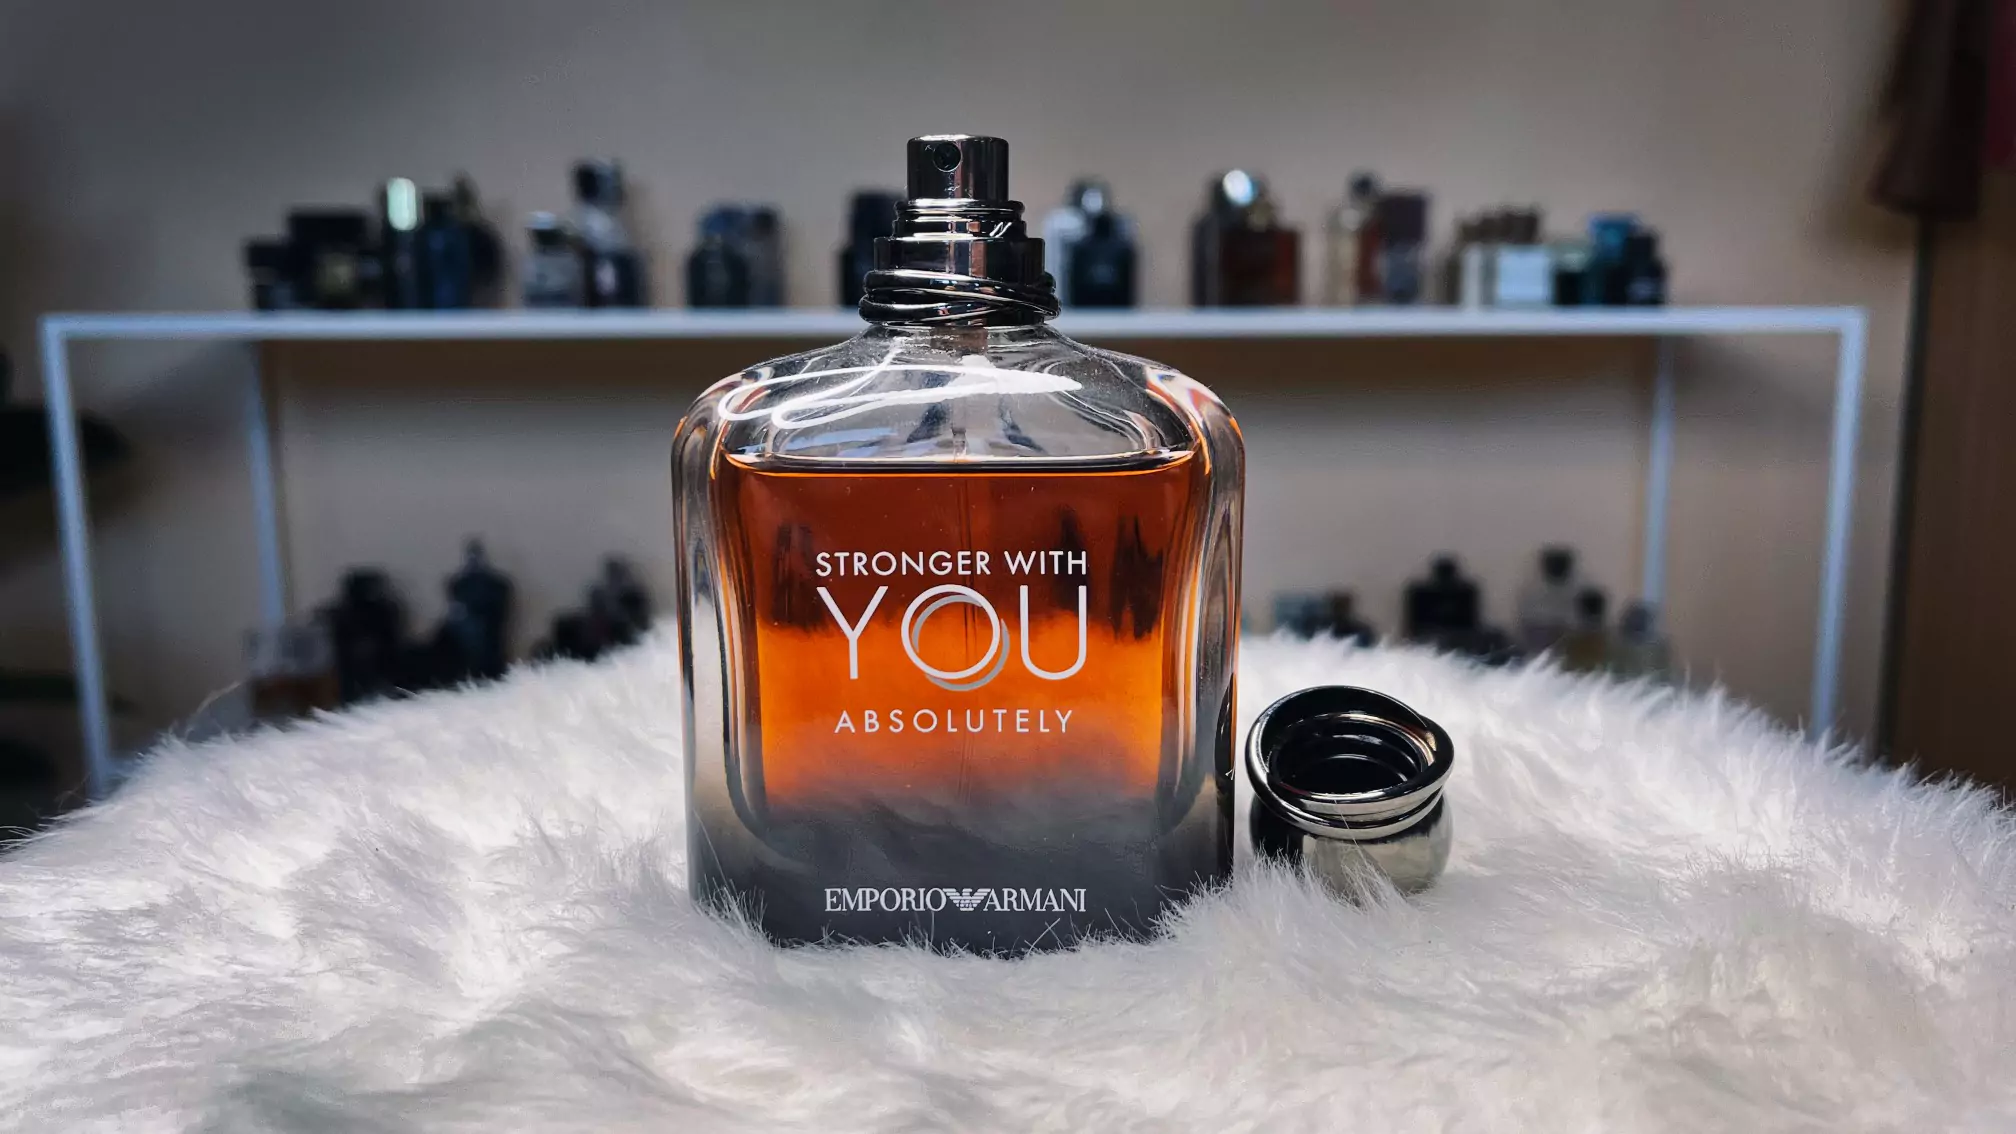 Stronger With You Absolutely（Armani）